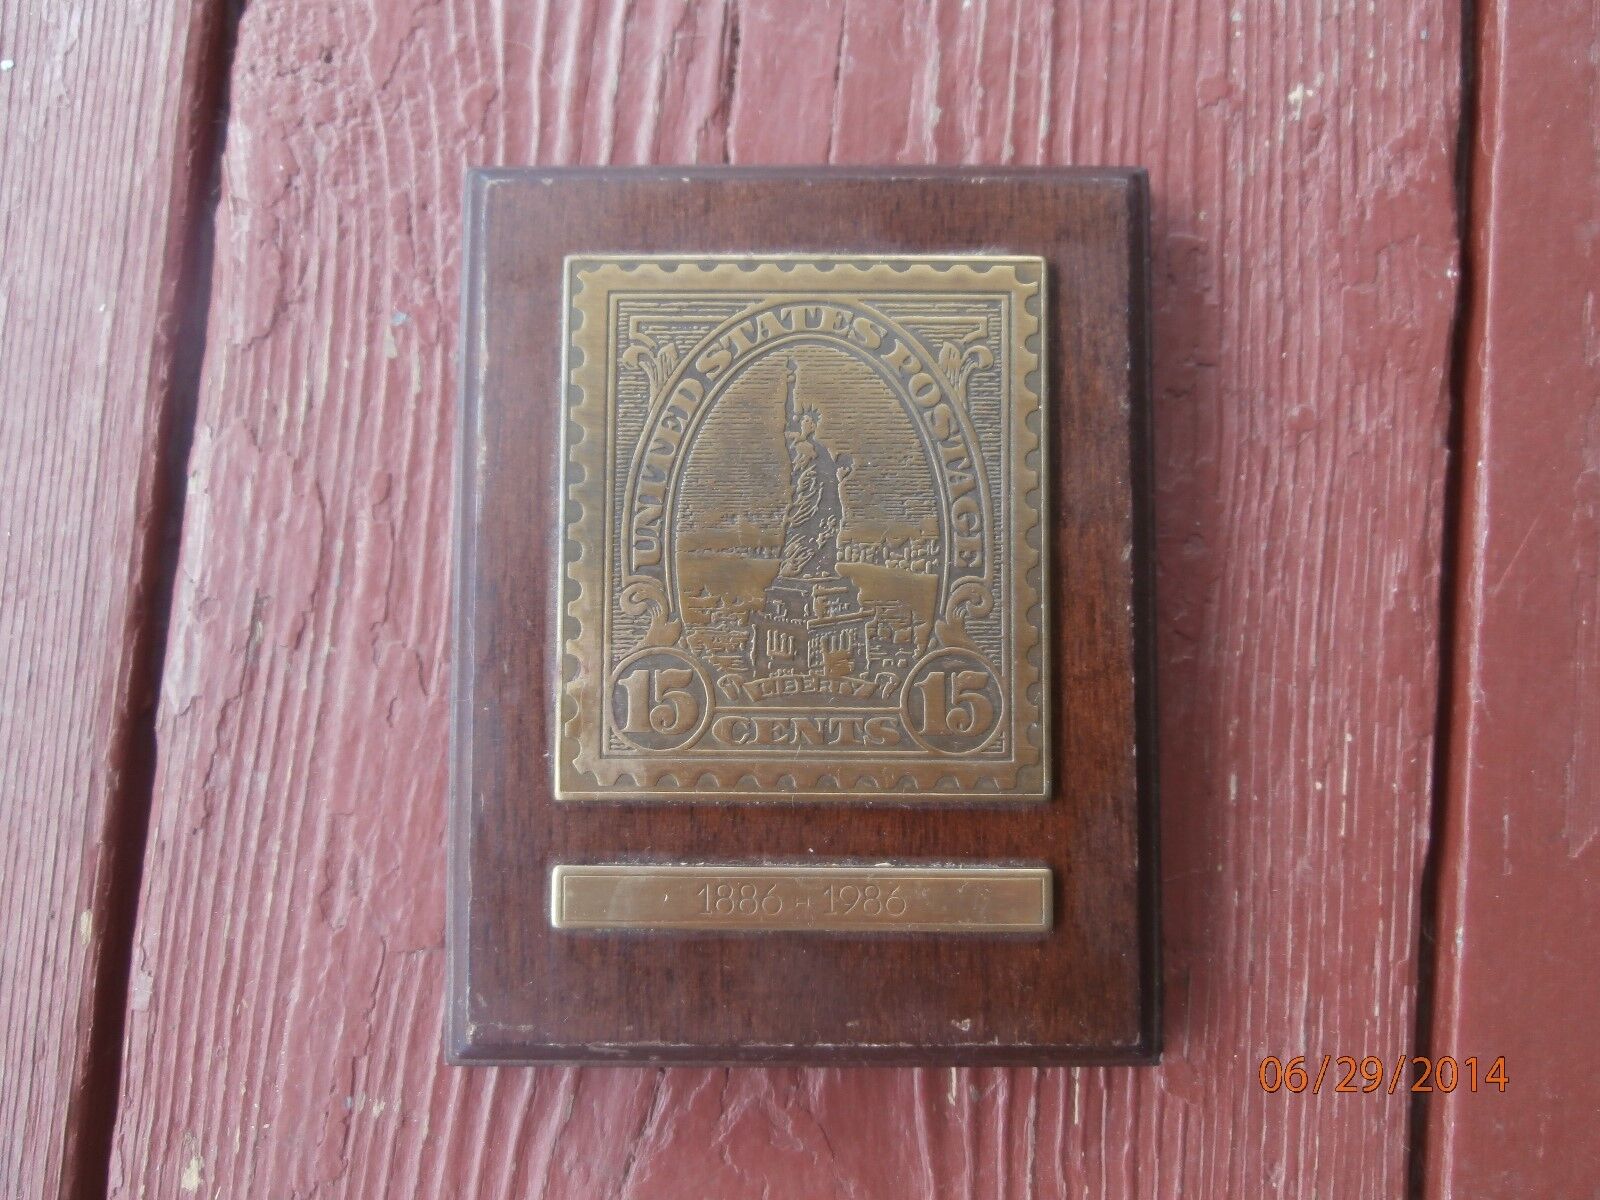 1985 avon statue of liberty plaque gold postage stamp 15 cents 1886-1986